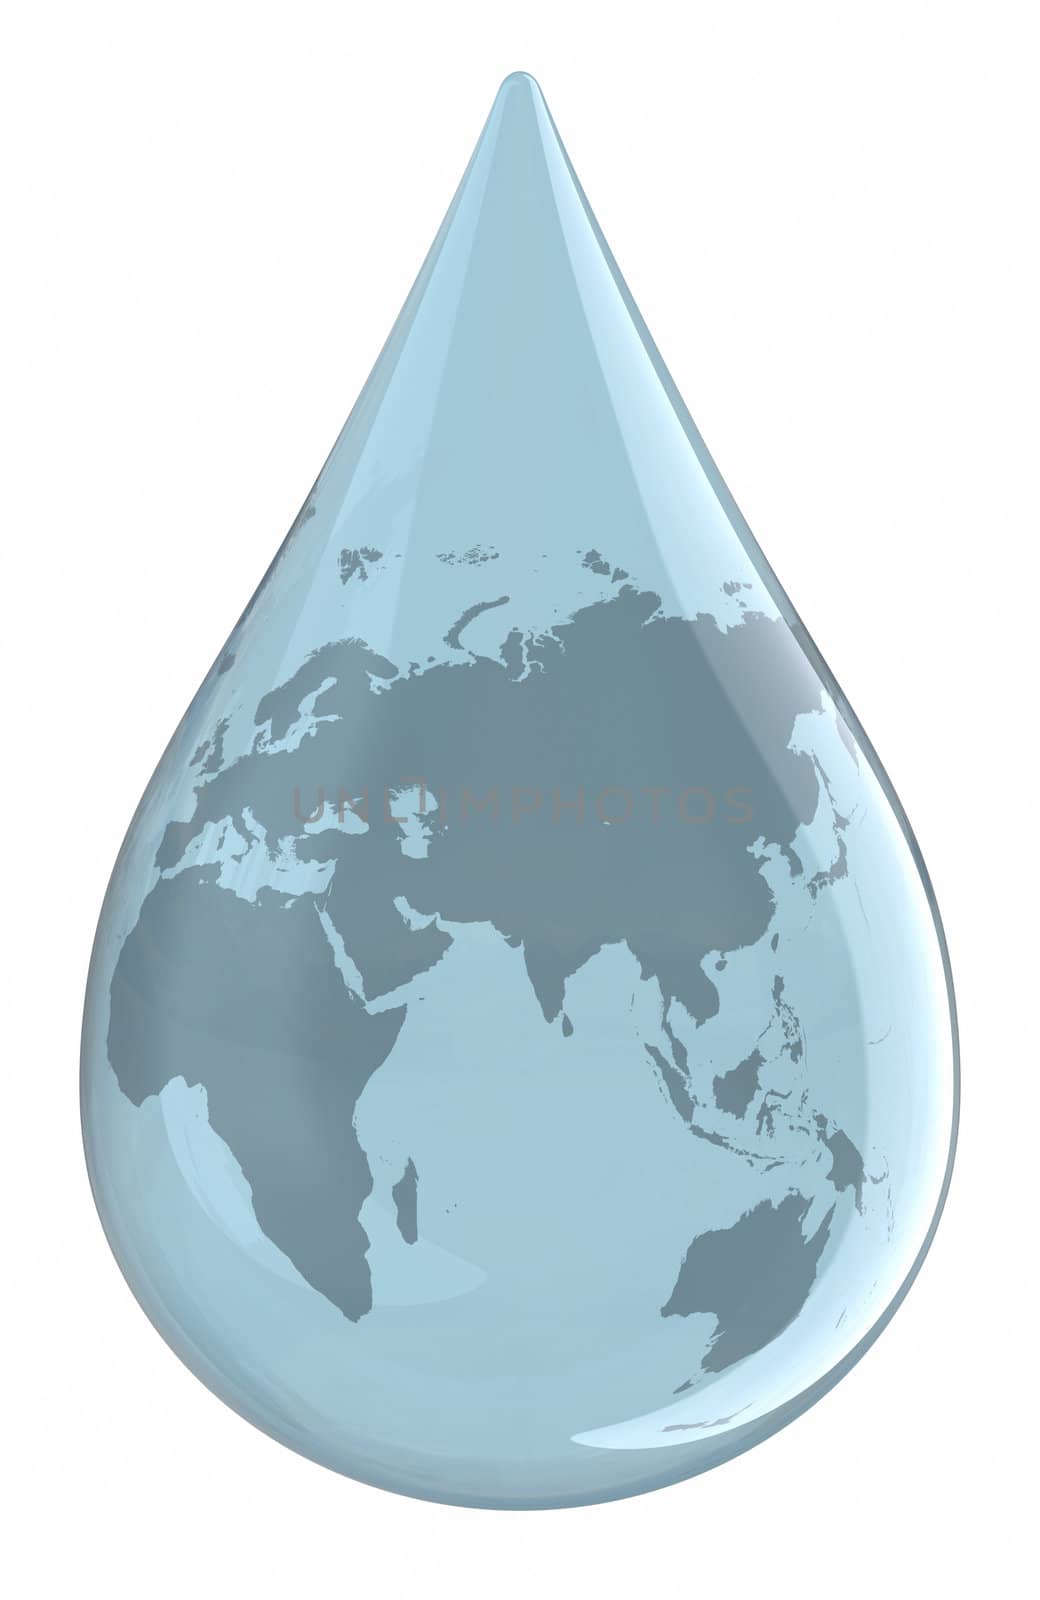 Water droplet with World Map. Clipping path included.